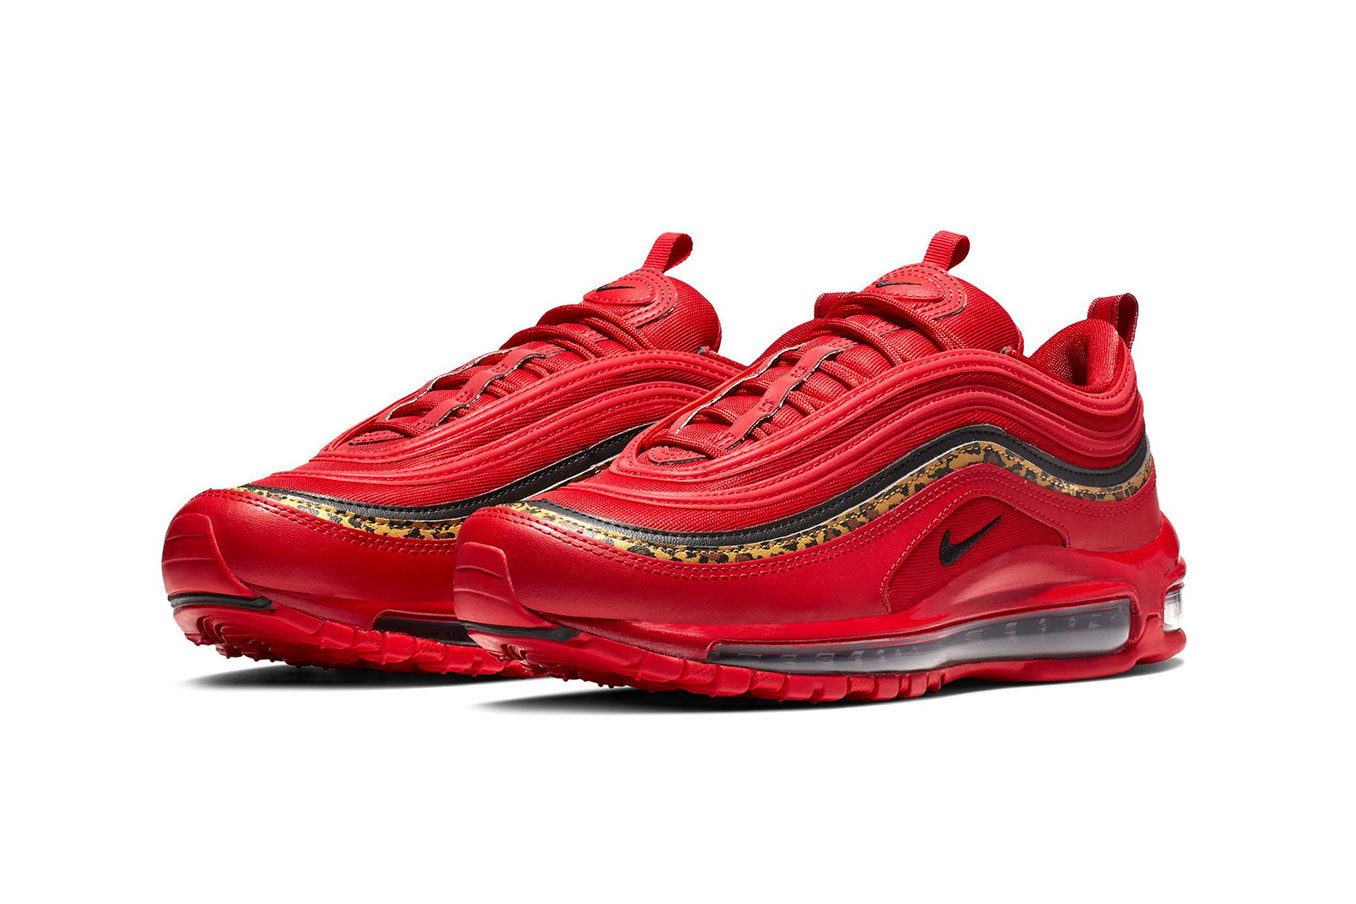 Celebrate the festive season with the bright red Nike Air Max 97 with "Leopard print"